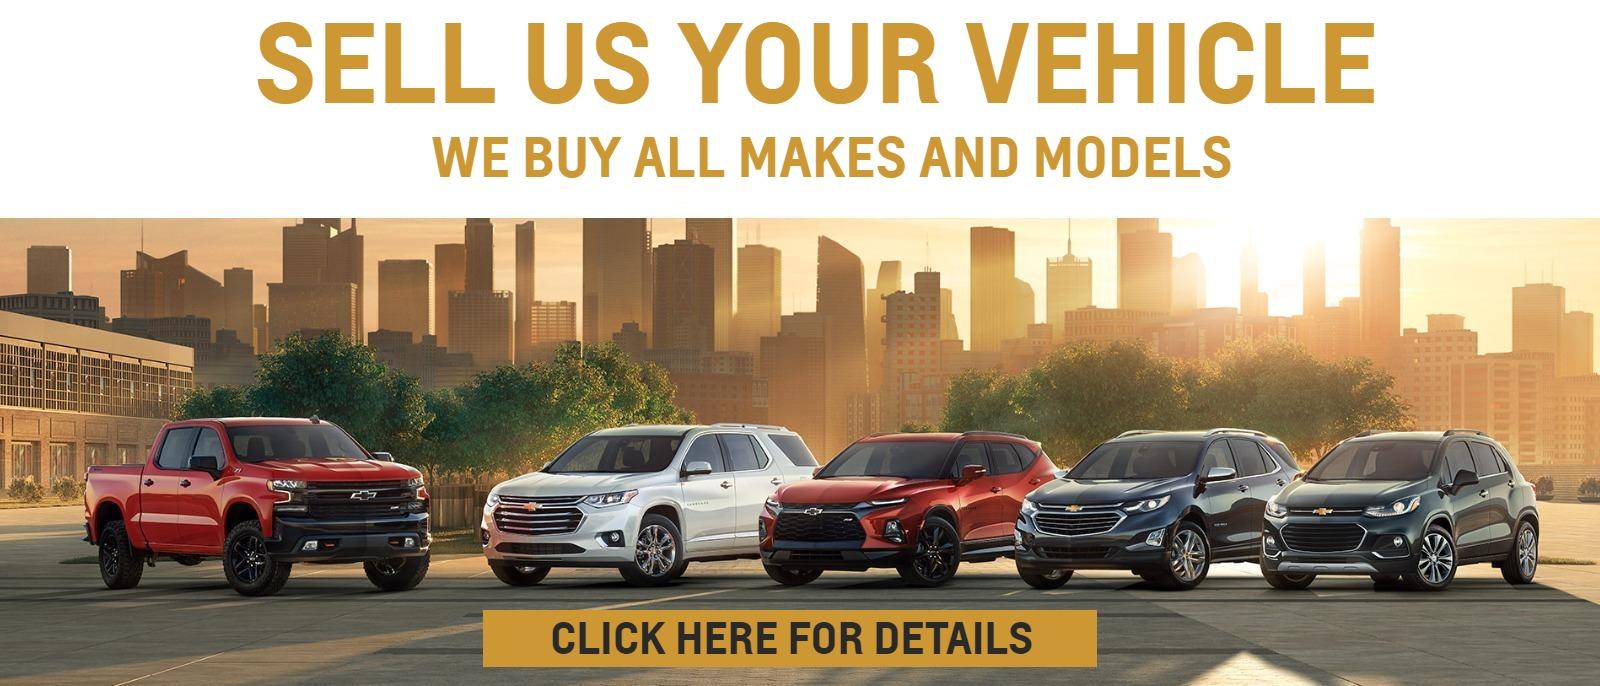 Sell Us your vehicle